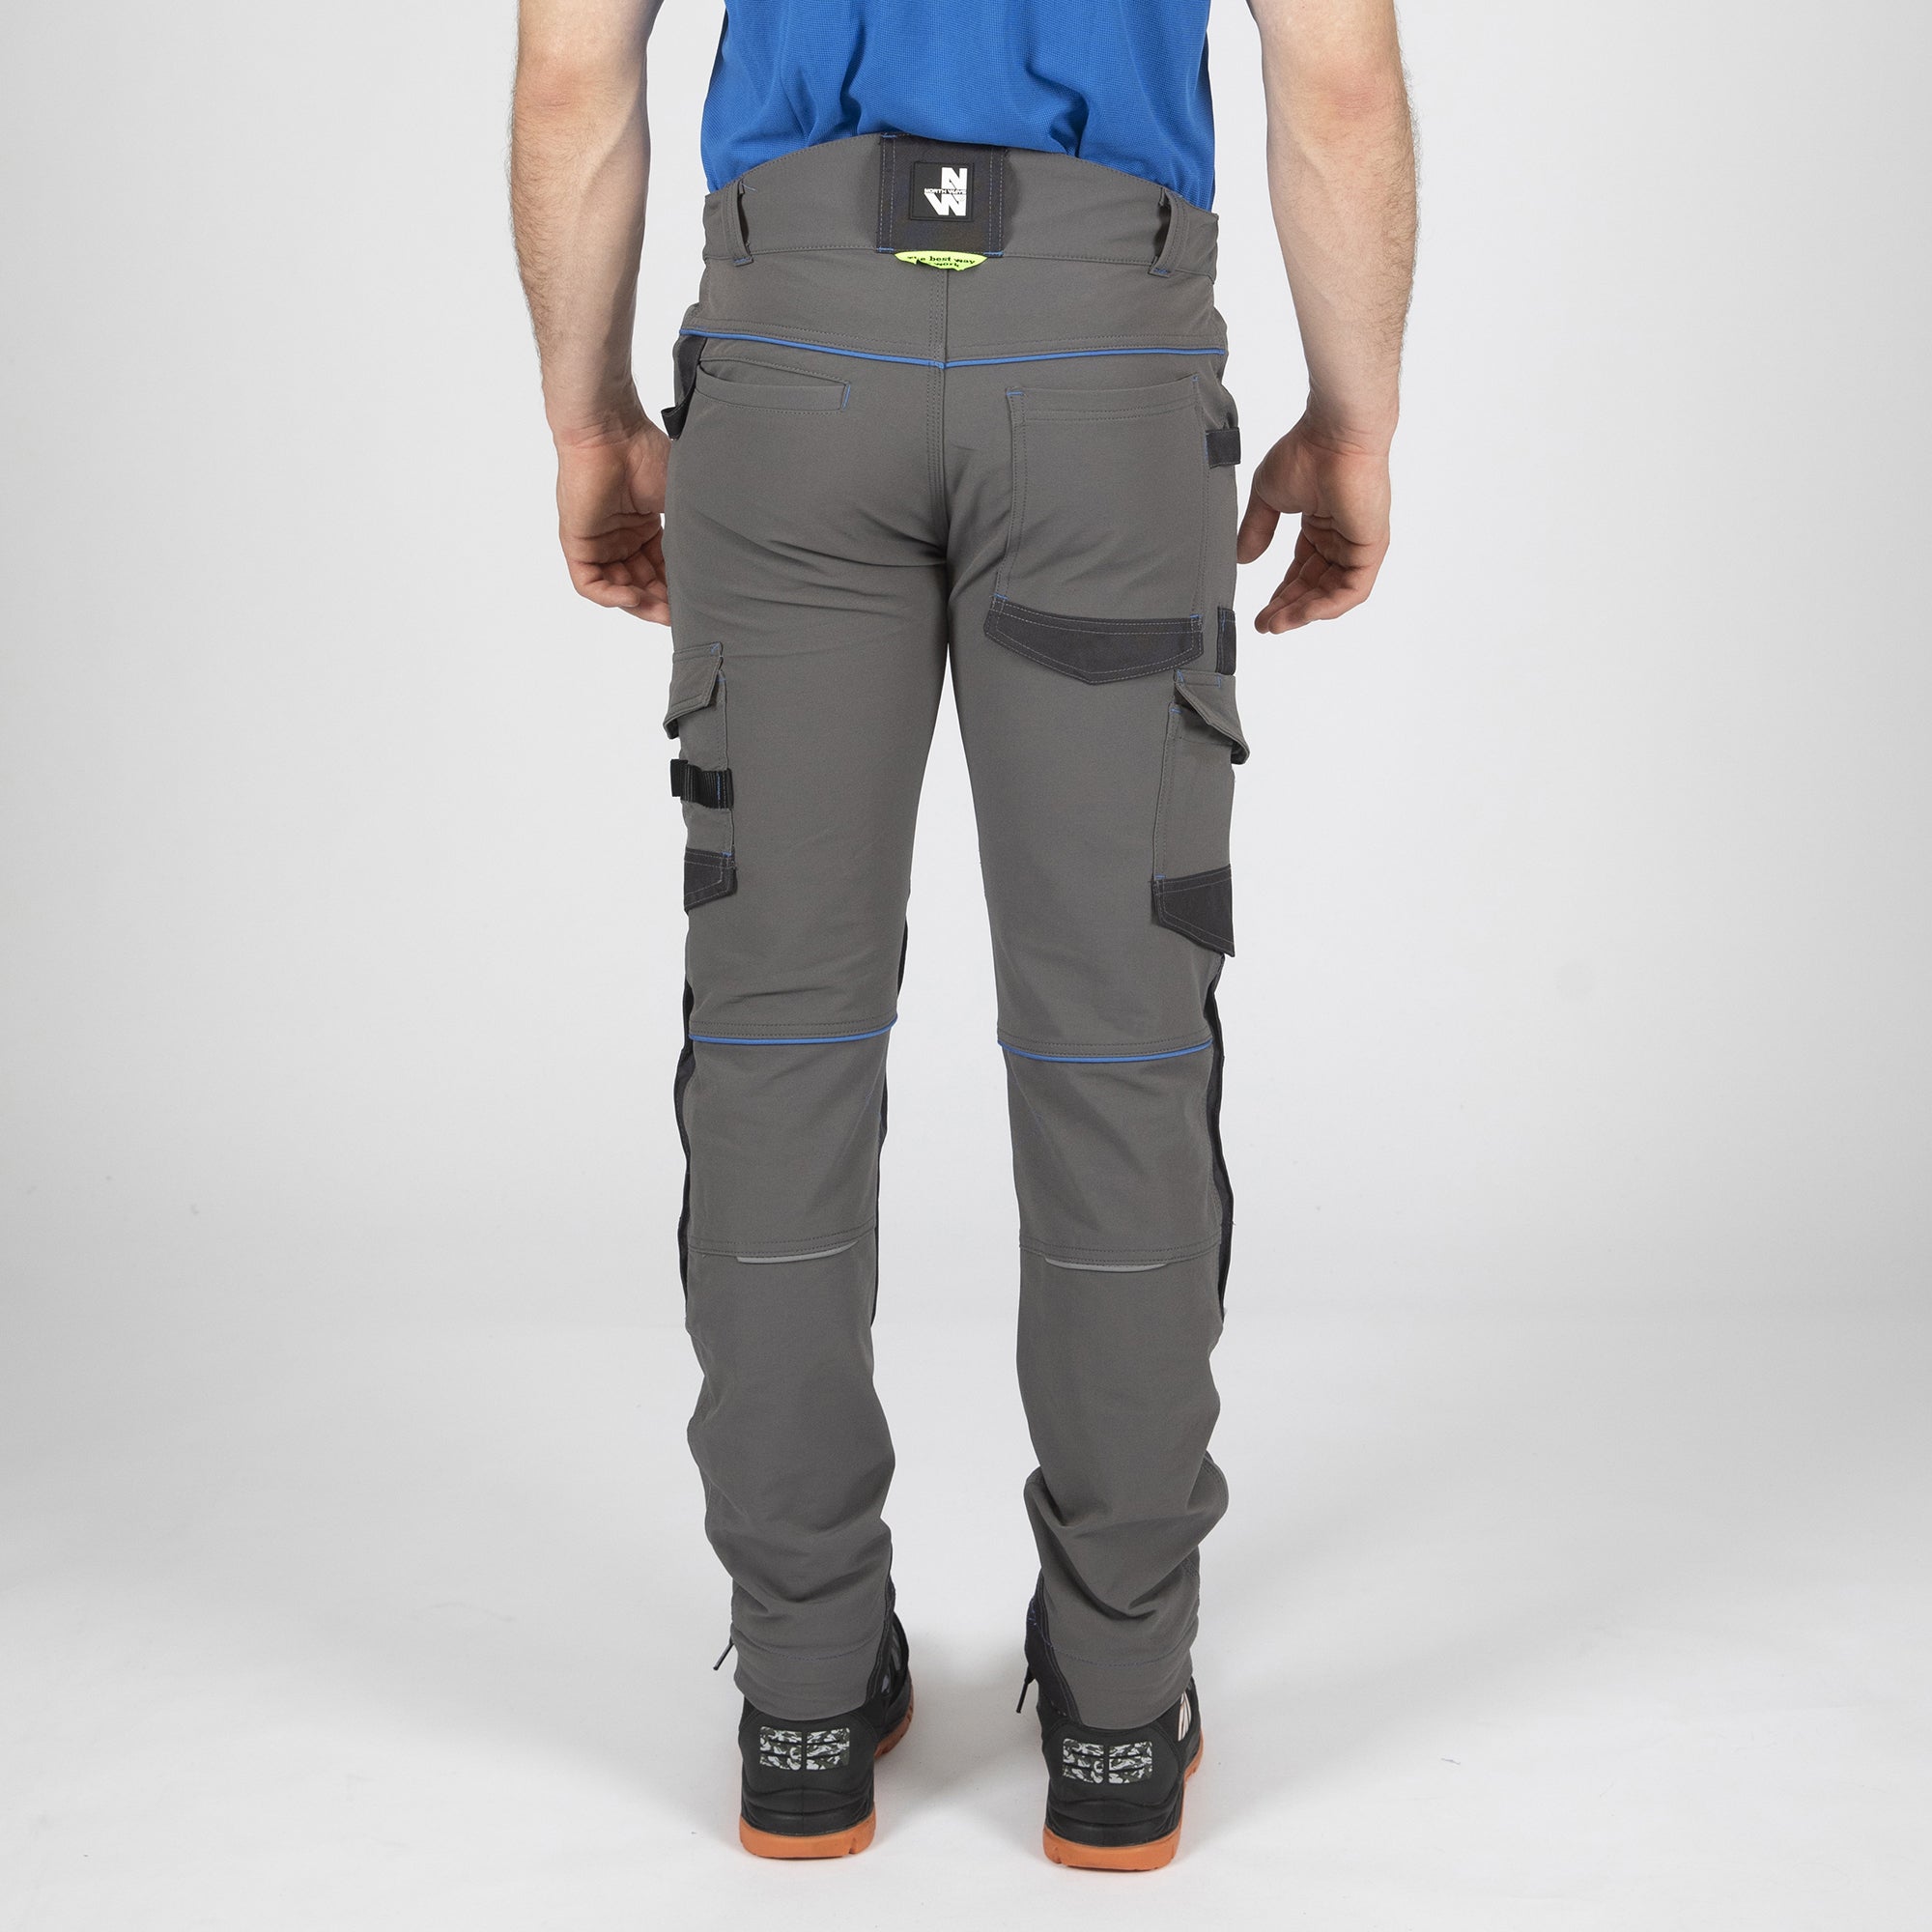 Safety trousers size M/50, grey, weight 190g/m2, 20% polyester 80% cotton  M/50 | dedra.pl